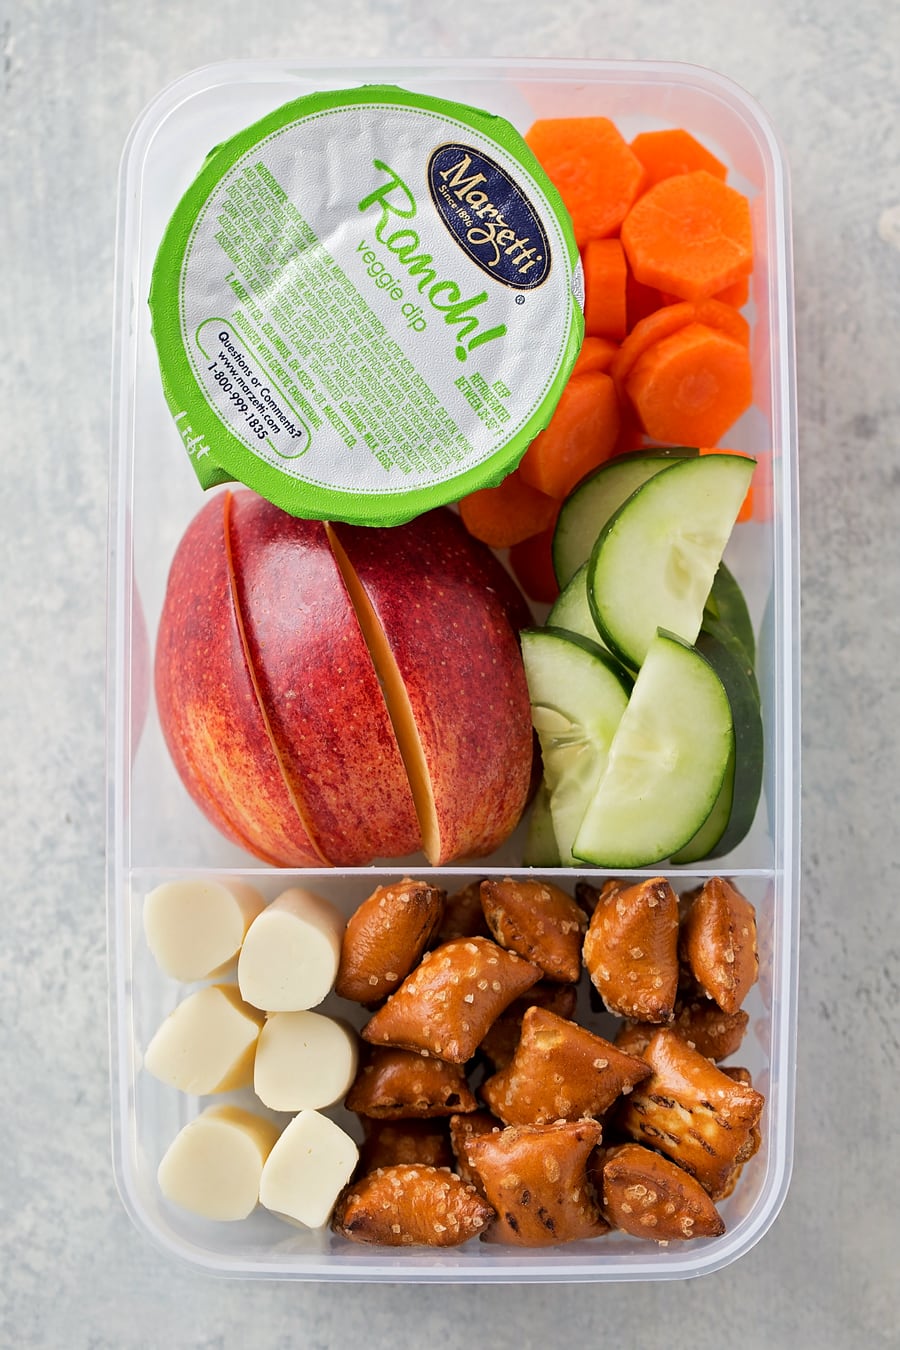 Lunch box idea with pretzels, cheese, apples, cucumber, and carrots